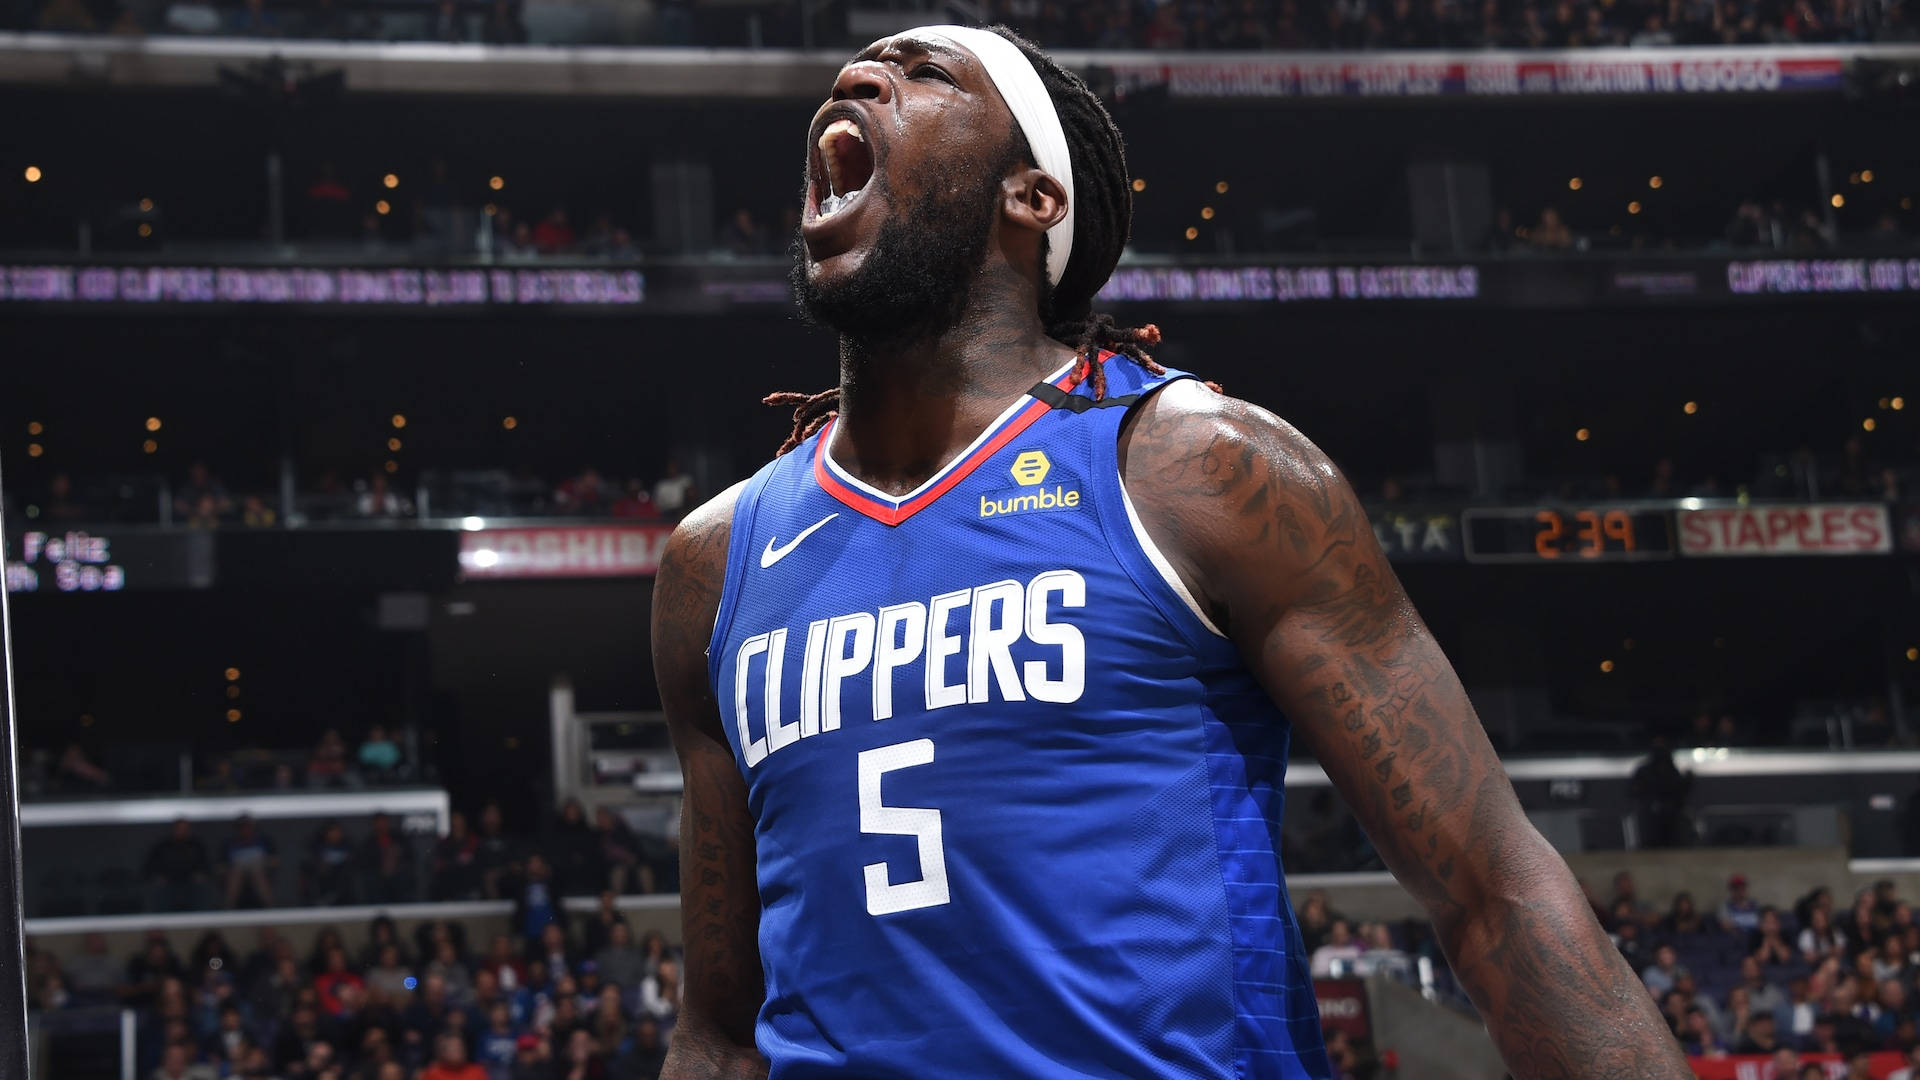 Clippers Montrezl Harrell Screaming On Court